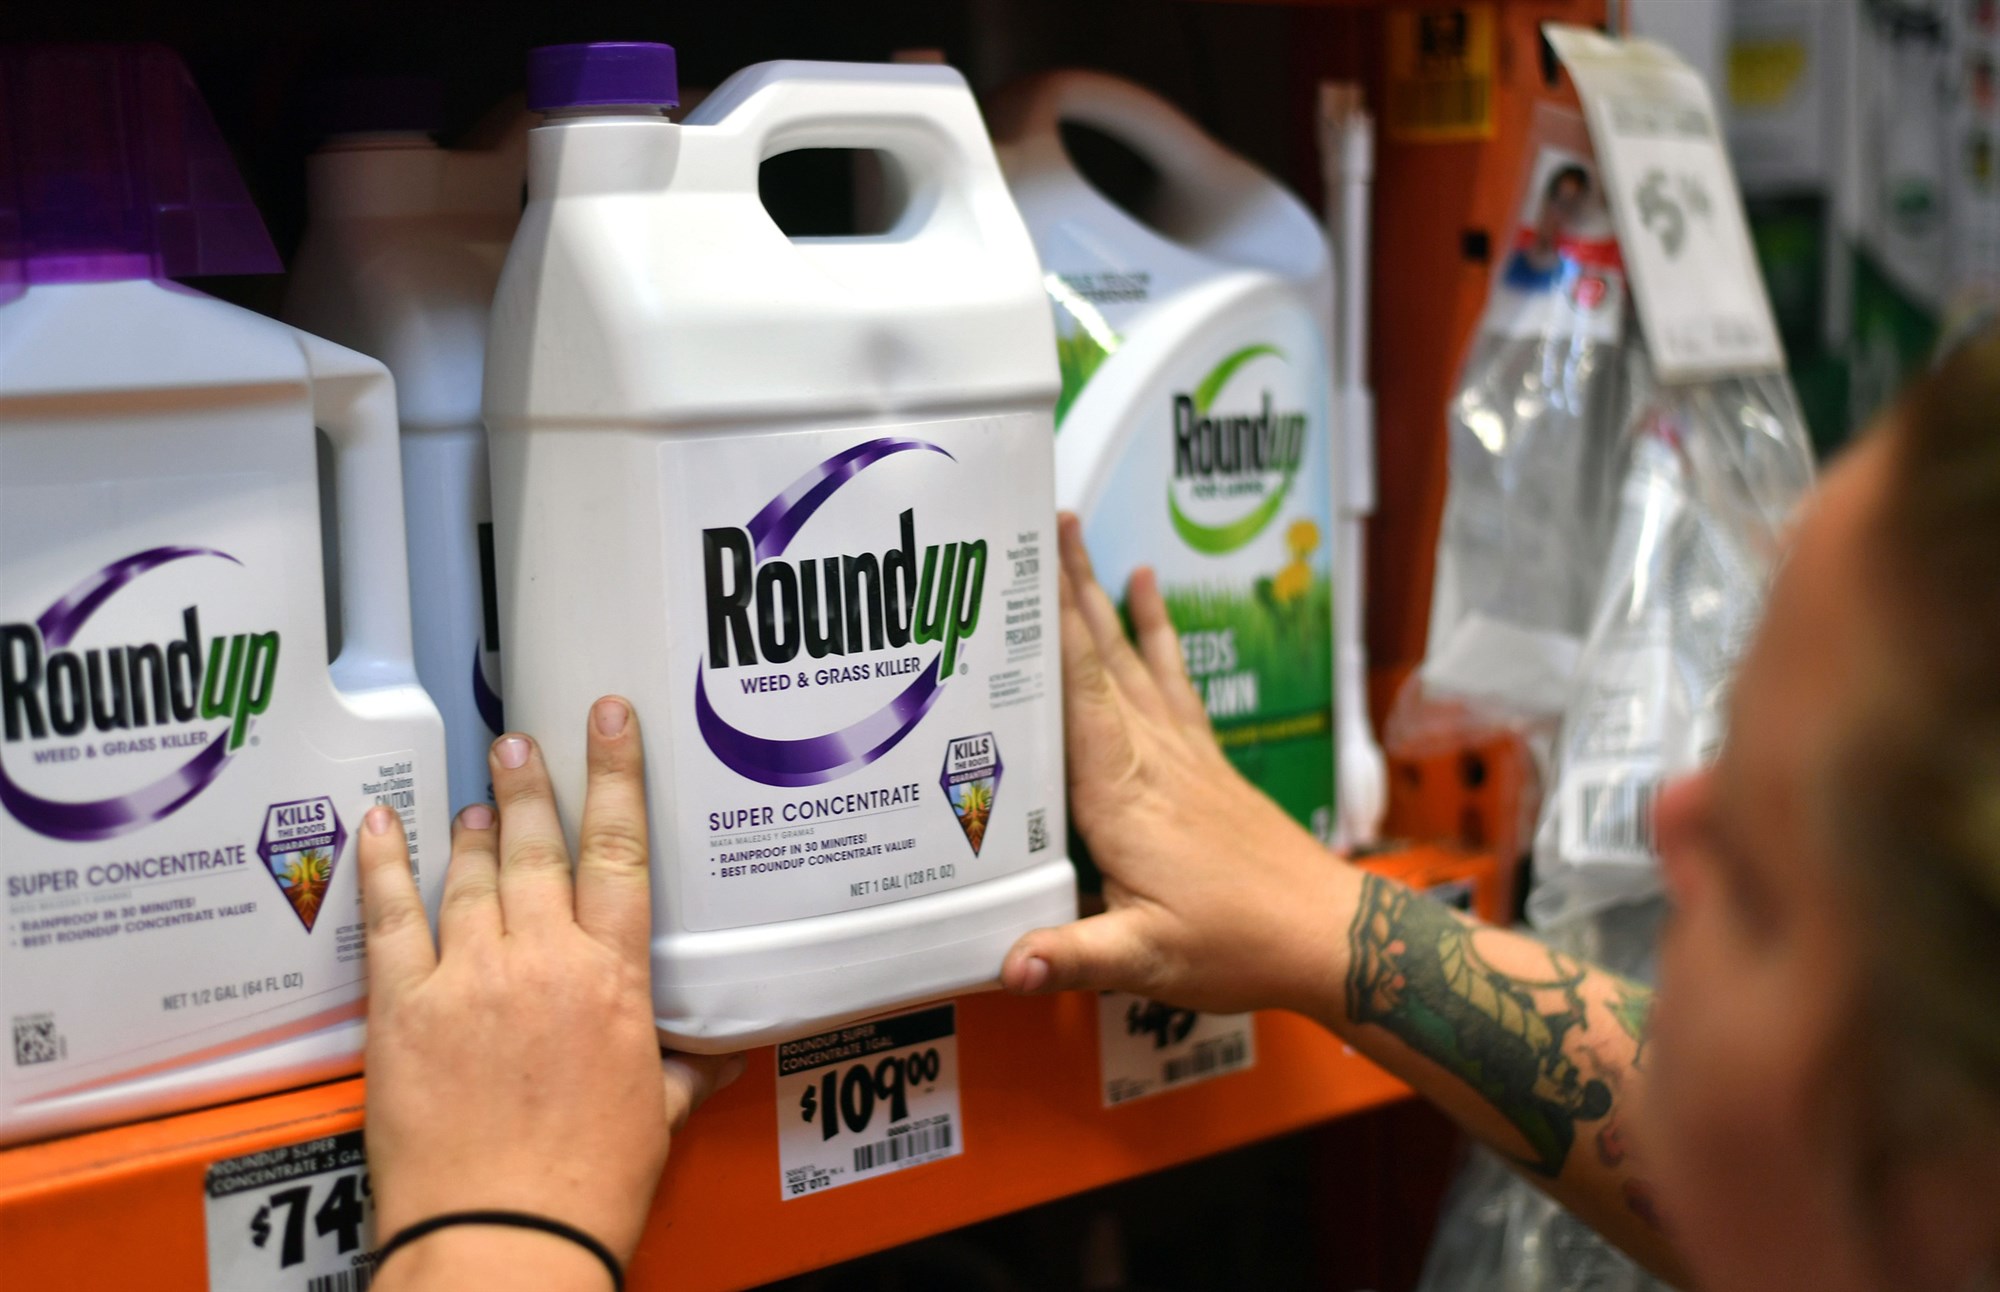 Roundup weed killer contains the pesticide glyphosate. 